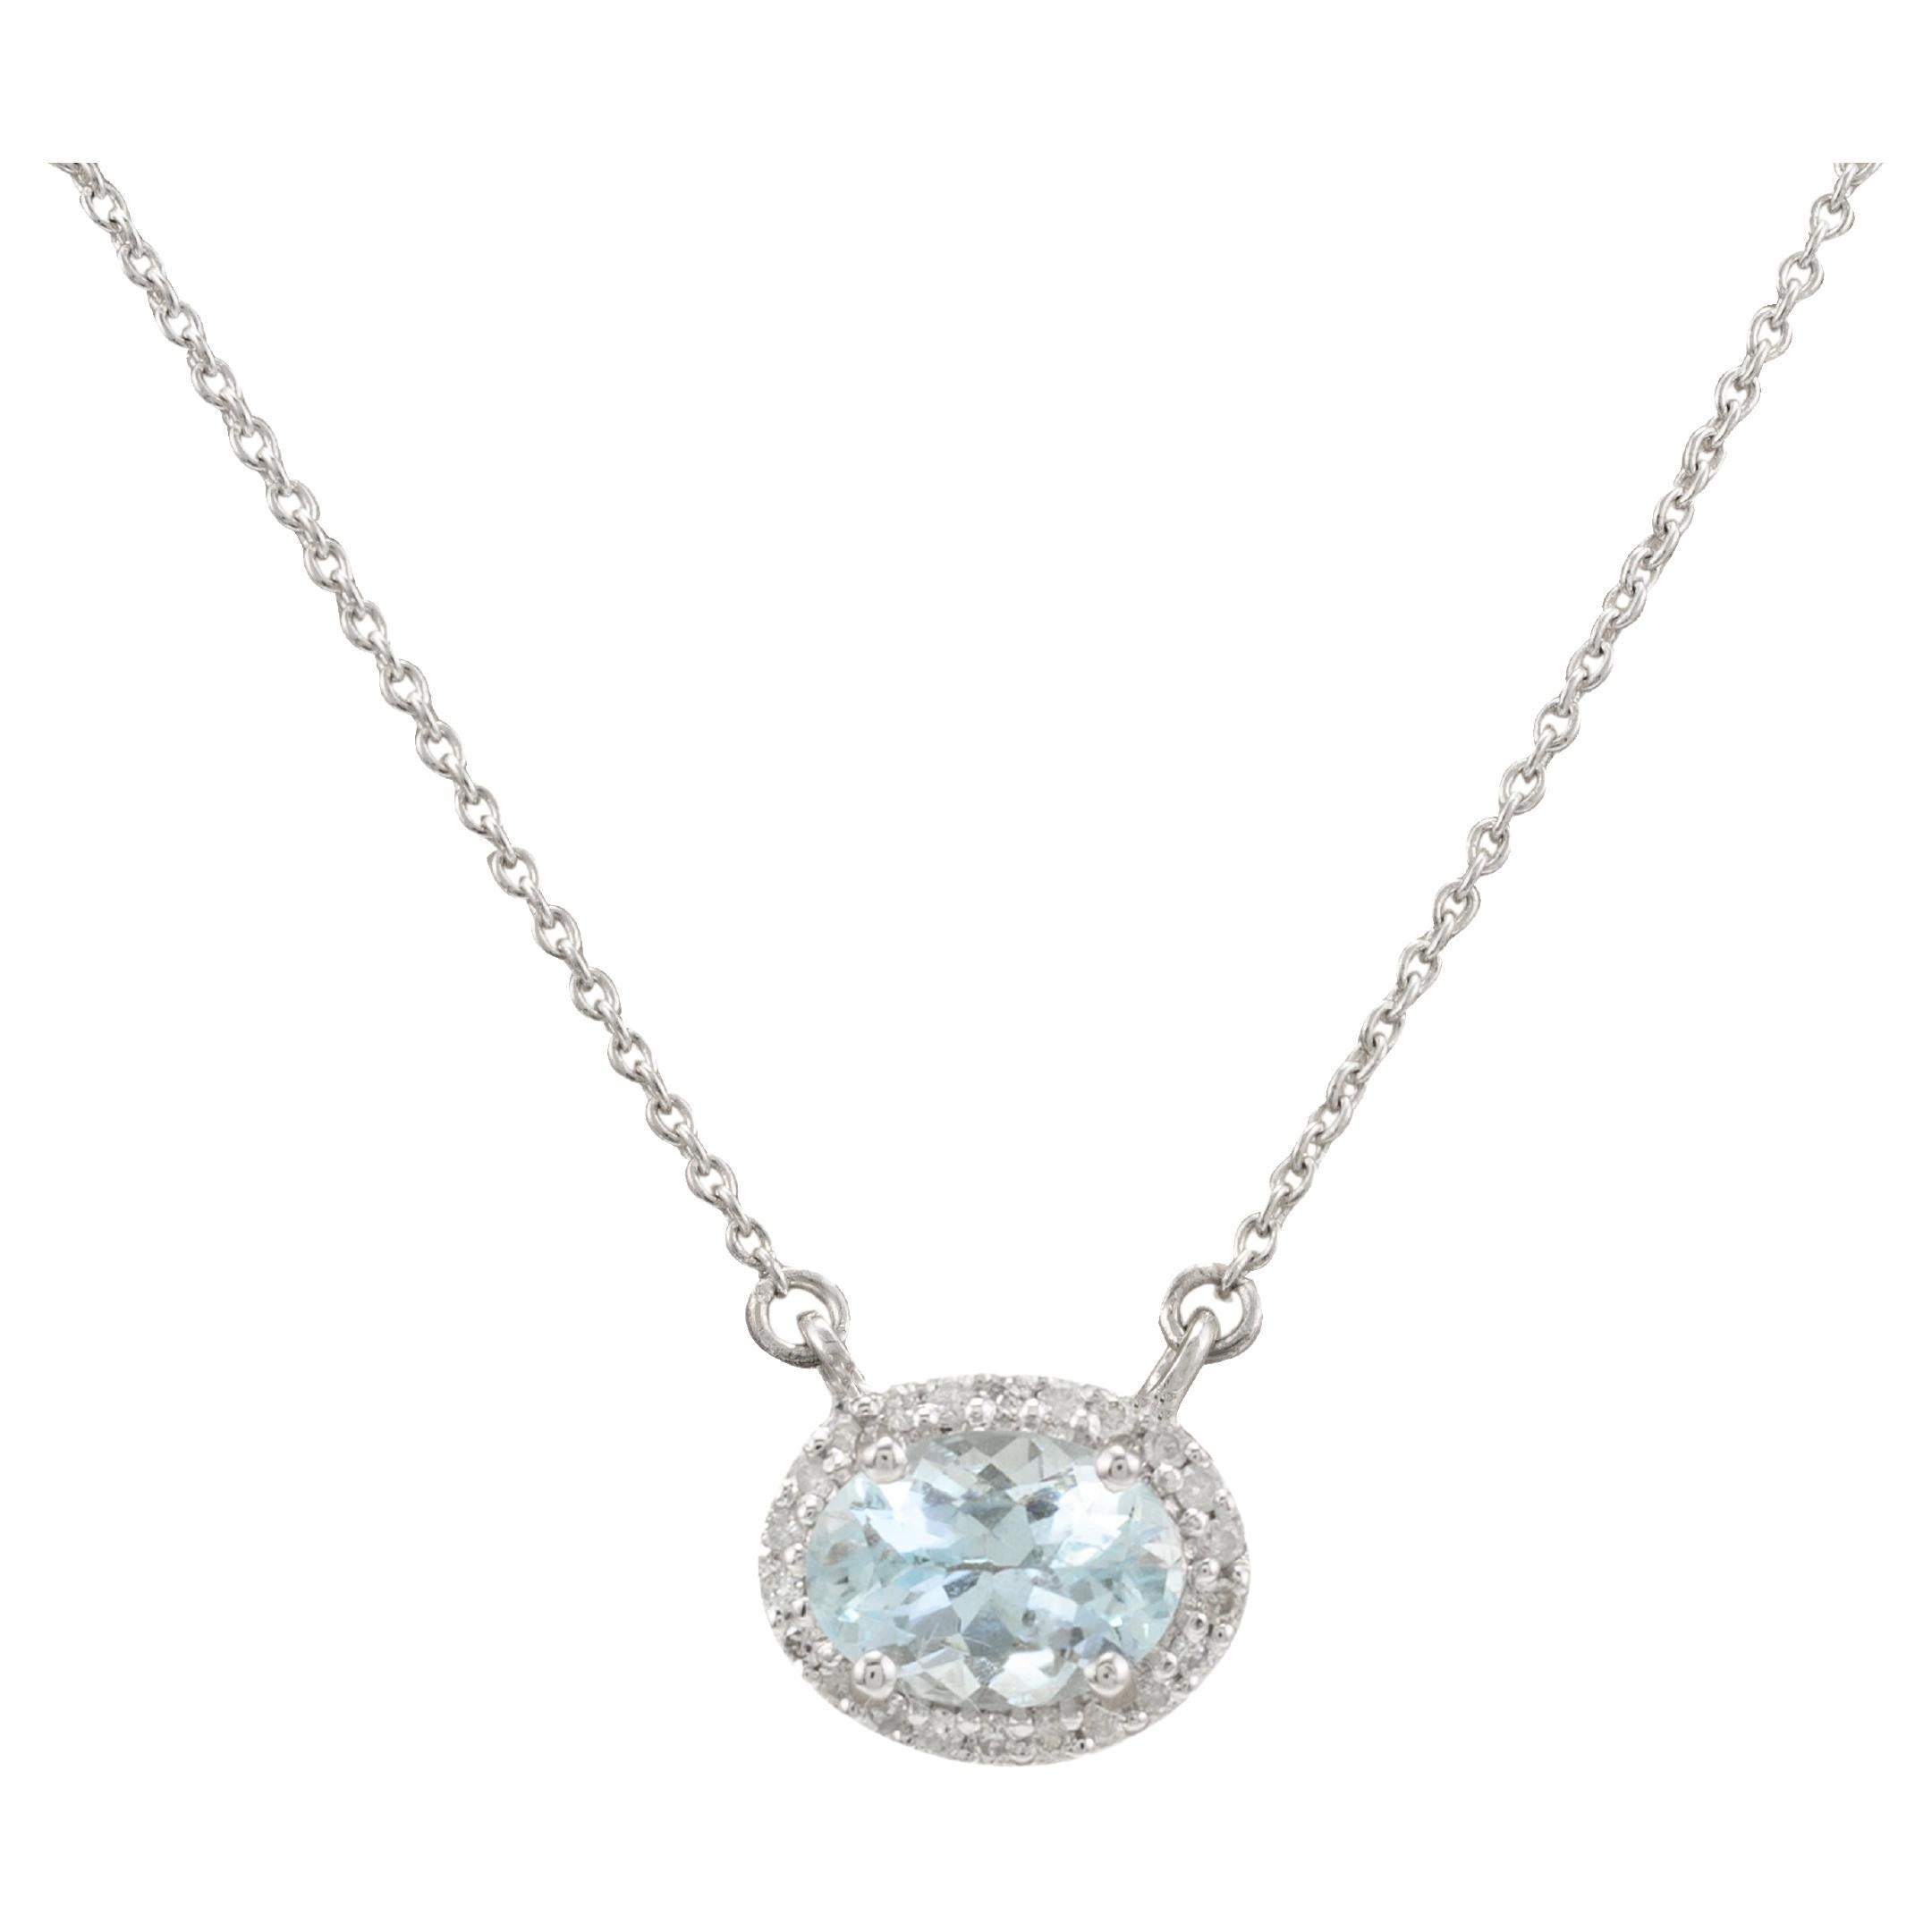 Halo Diamond Aquamarine Necklace 14k Solid White Gold, Thank You Gift For Her For Sale